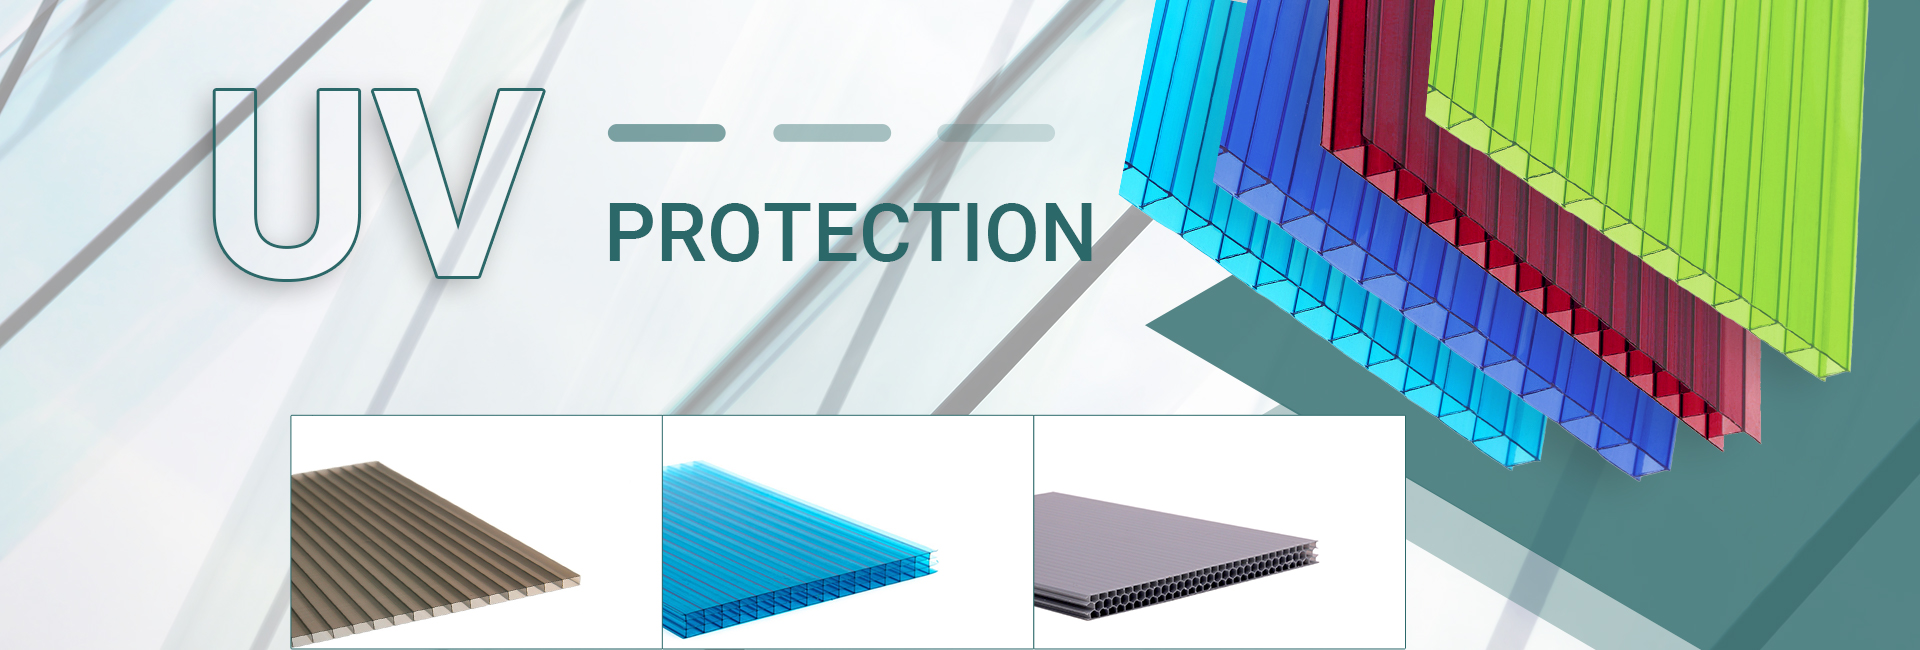 Polycarbonate hollow sheet introduction